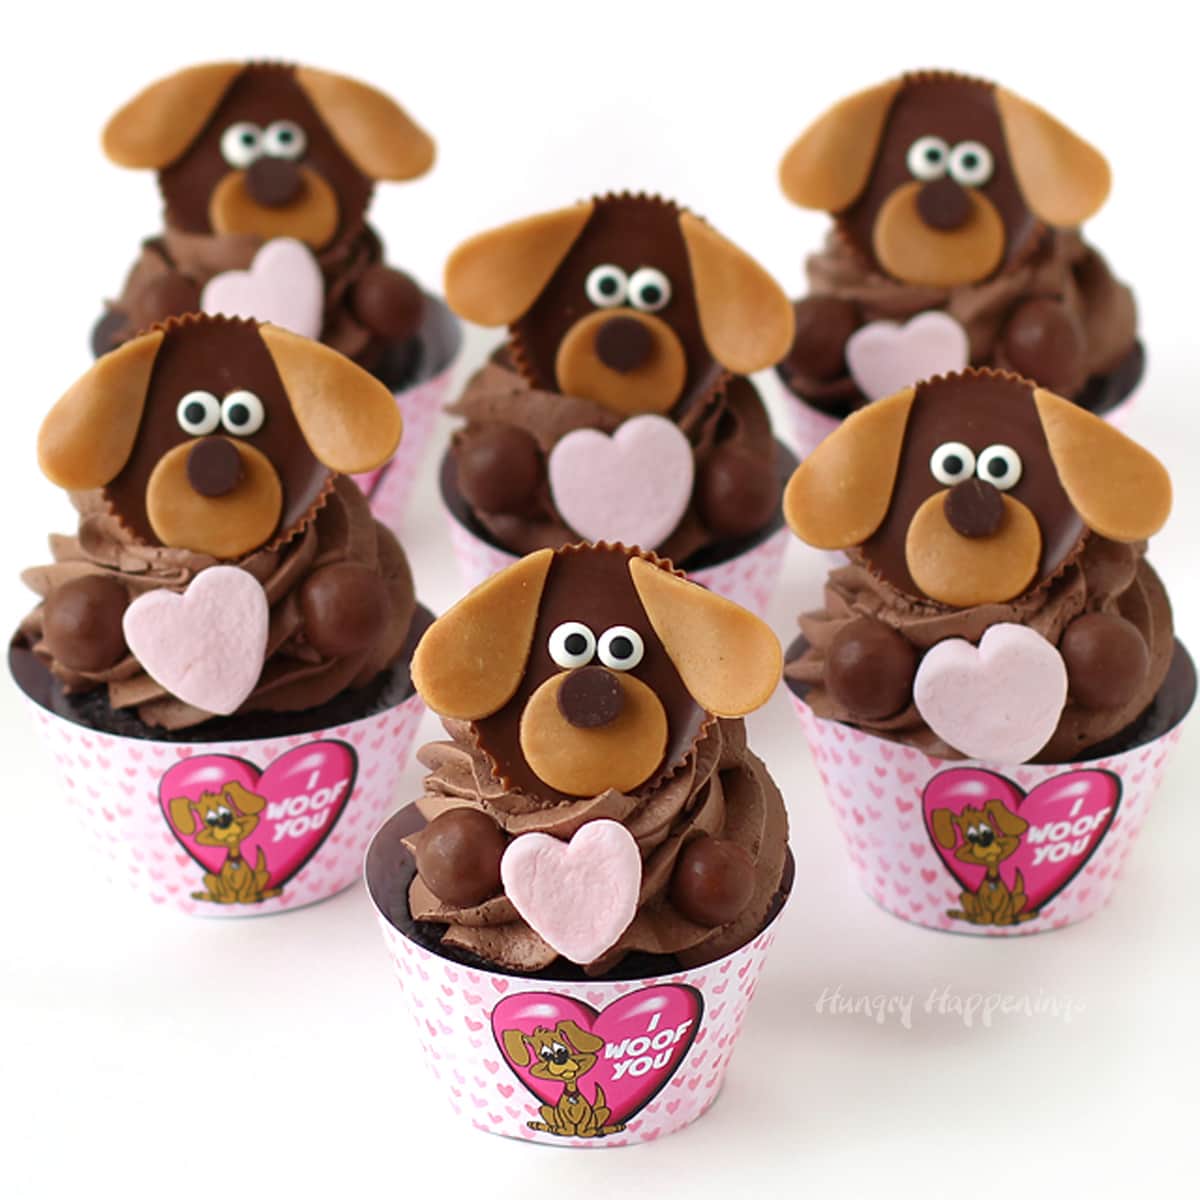 Cute chocolate dog cupcakes topped with Reese's Cups and candy hearts are wrapped in 